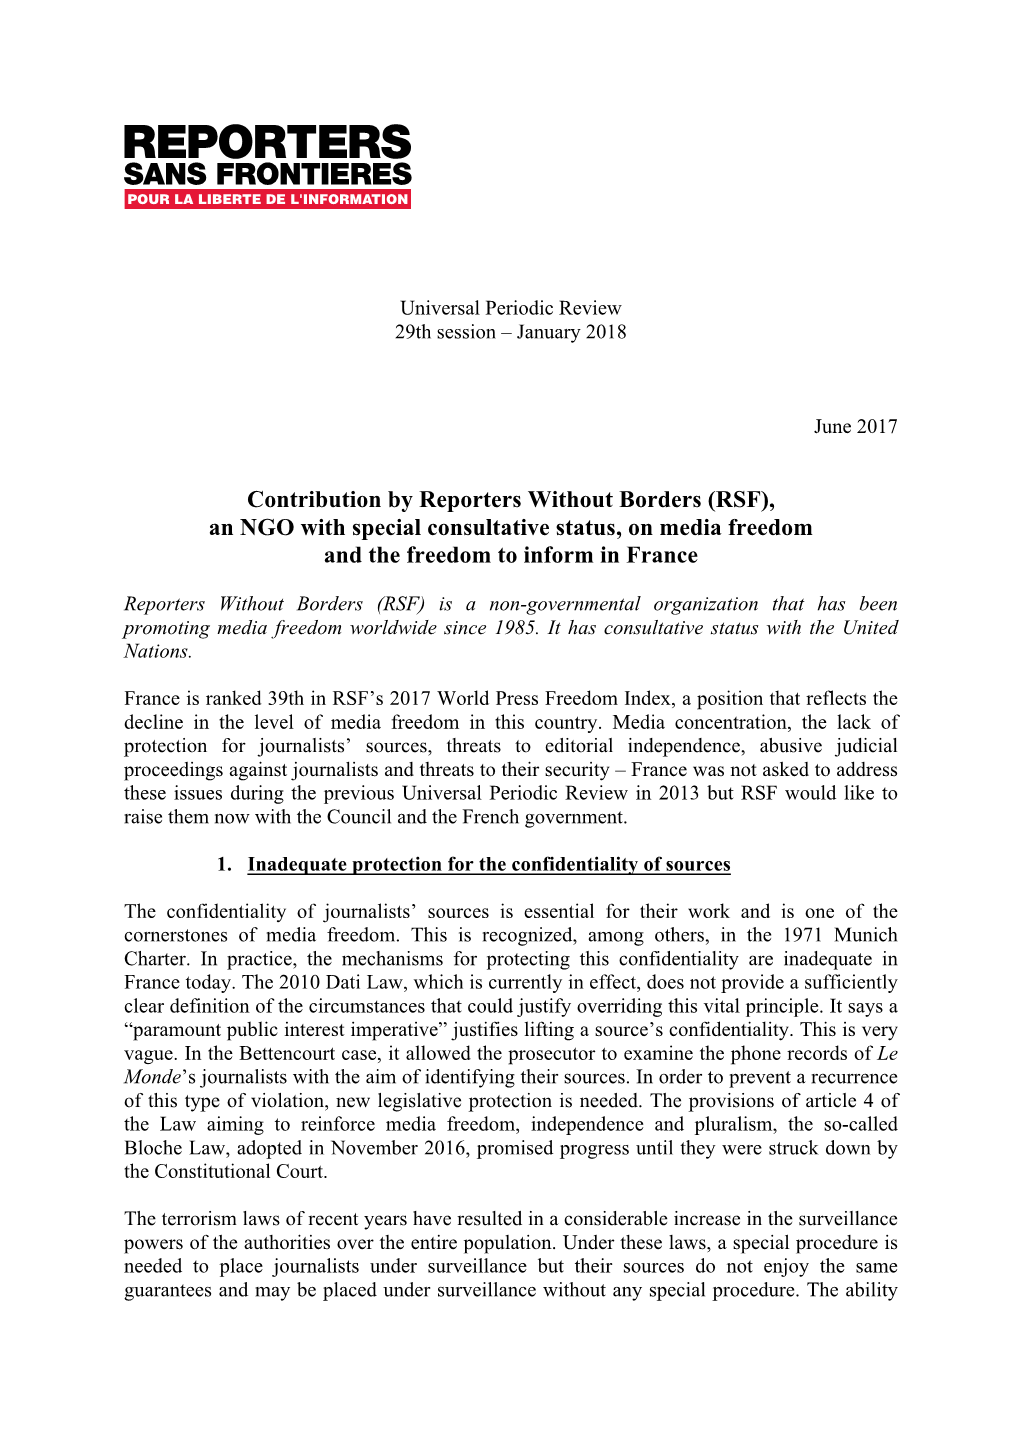 Contribution by Reporters Without Borders (RSF), an NGO with Special Consultative Status, on Media Freedom and the Freedom to Inform in France